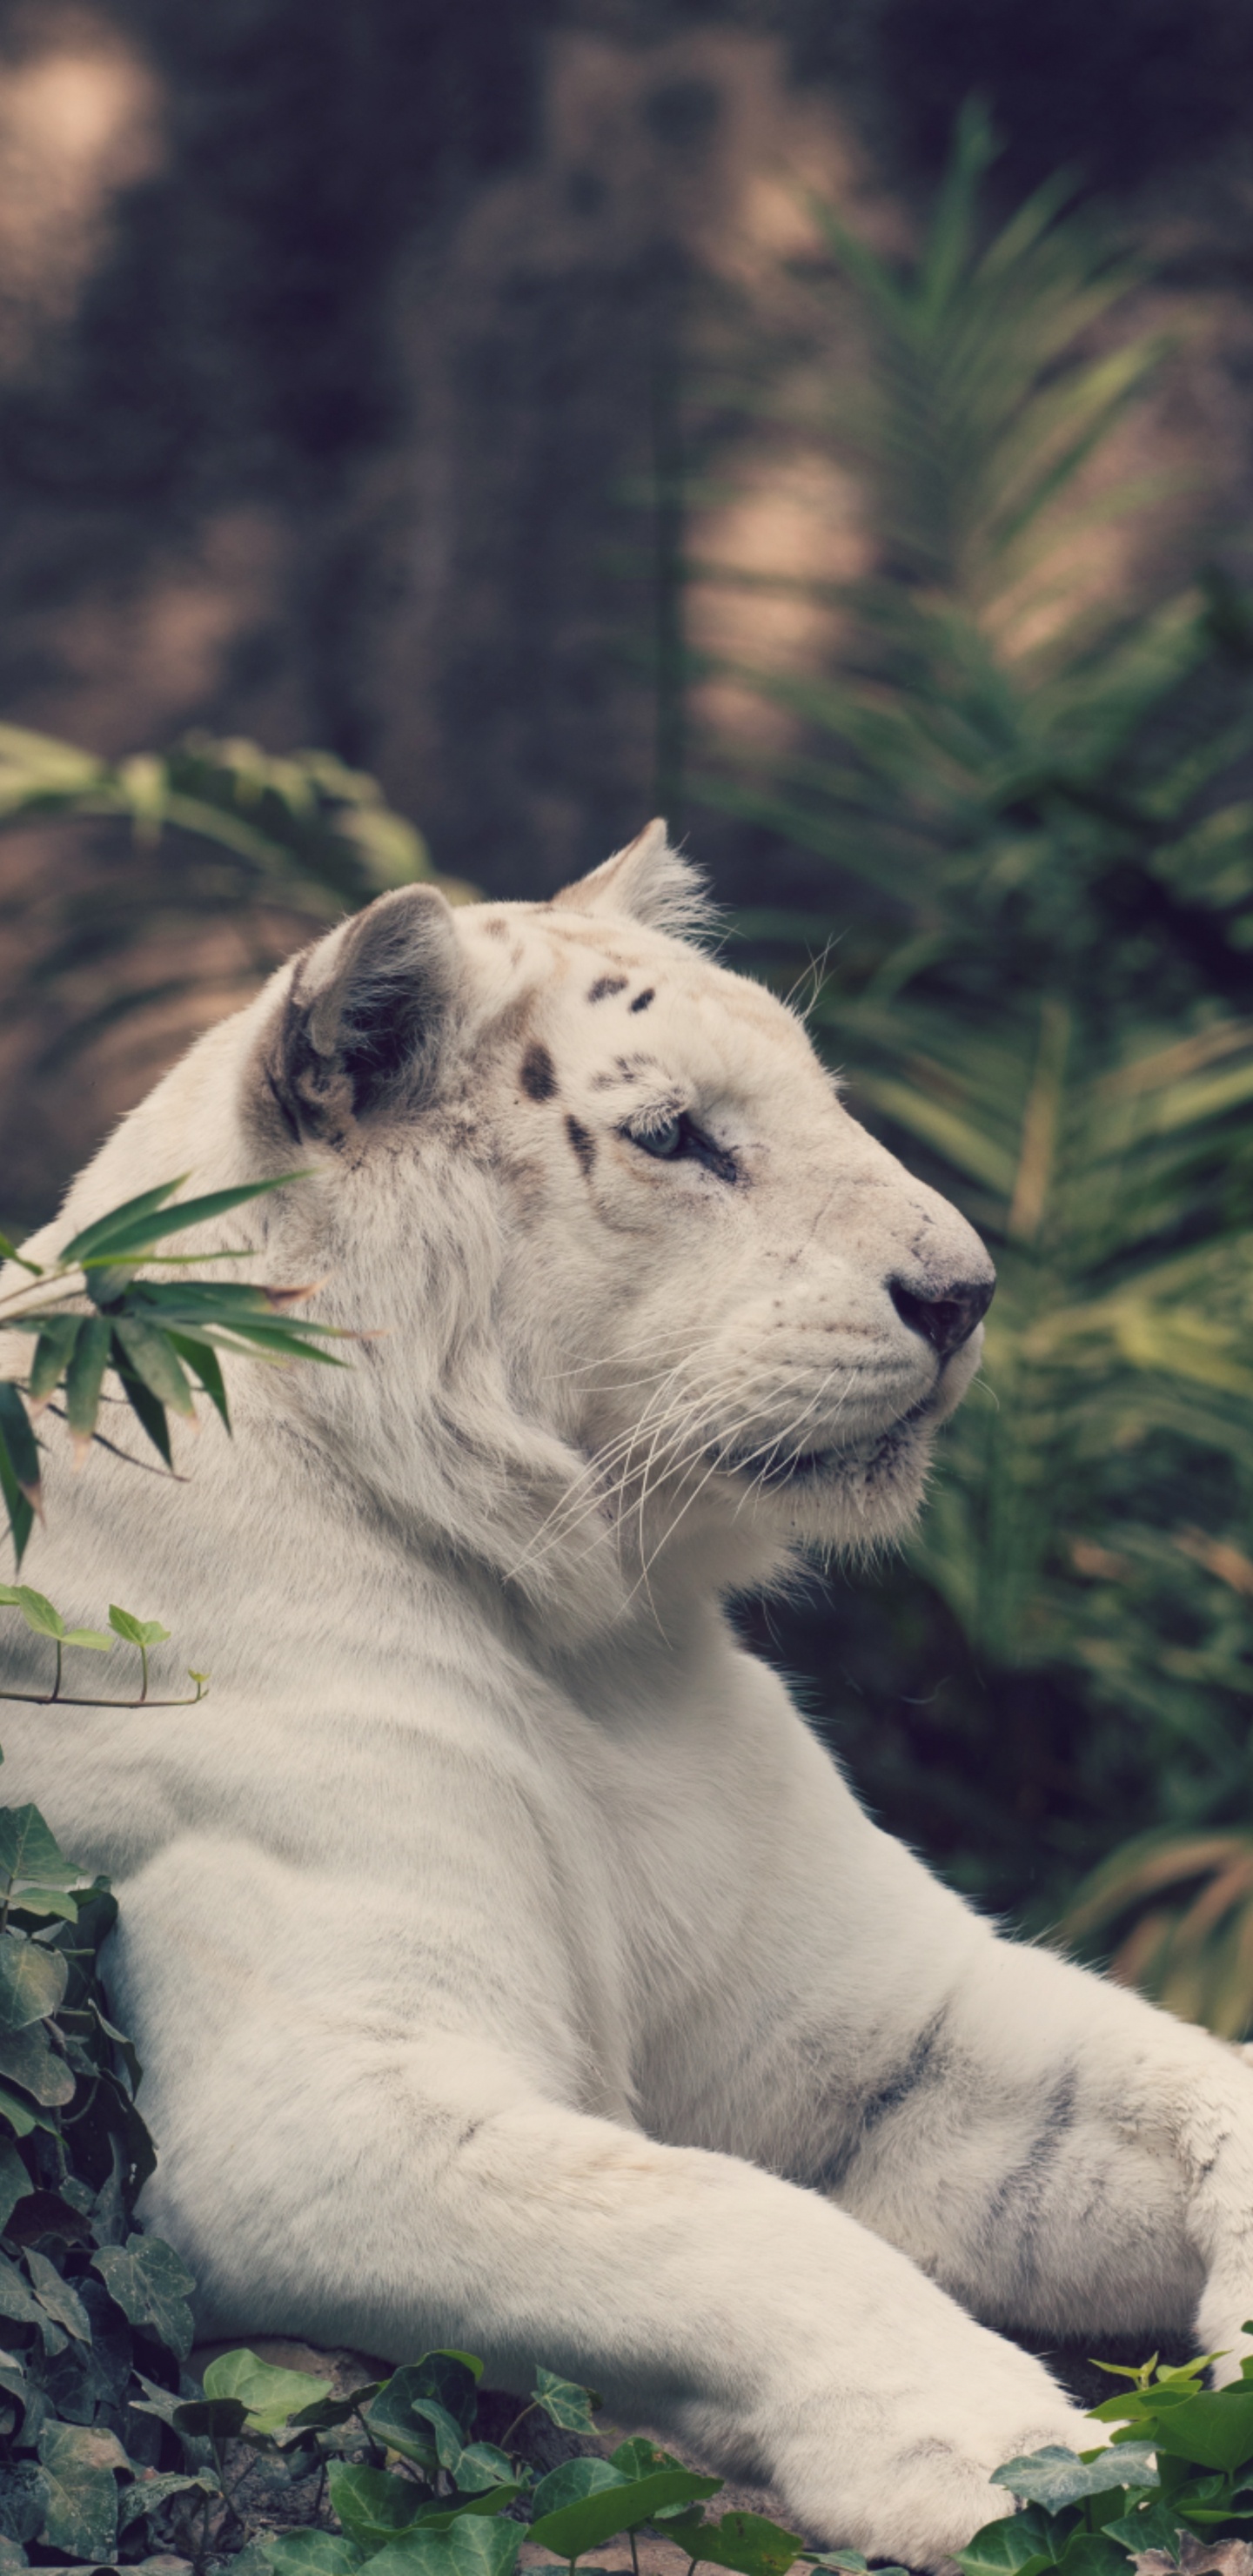 White Tiger Lying on Ground. Wallpaper in 1440x2960 Resolution